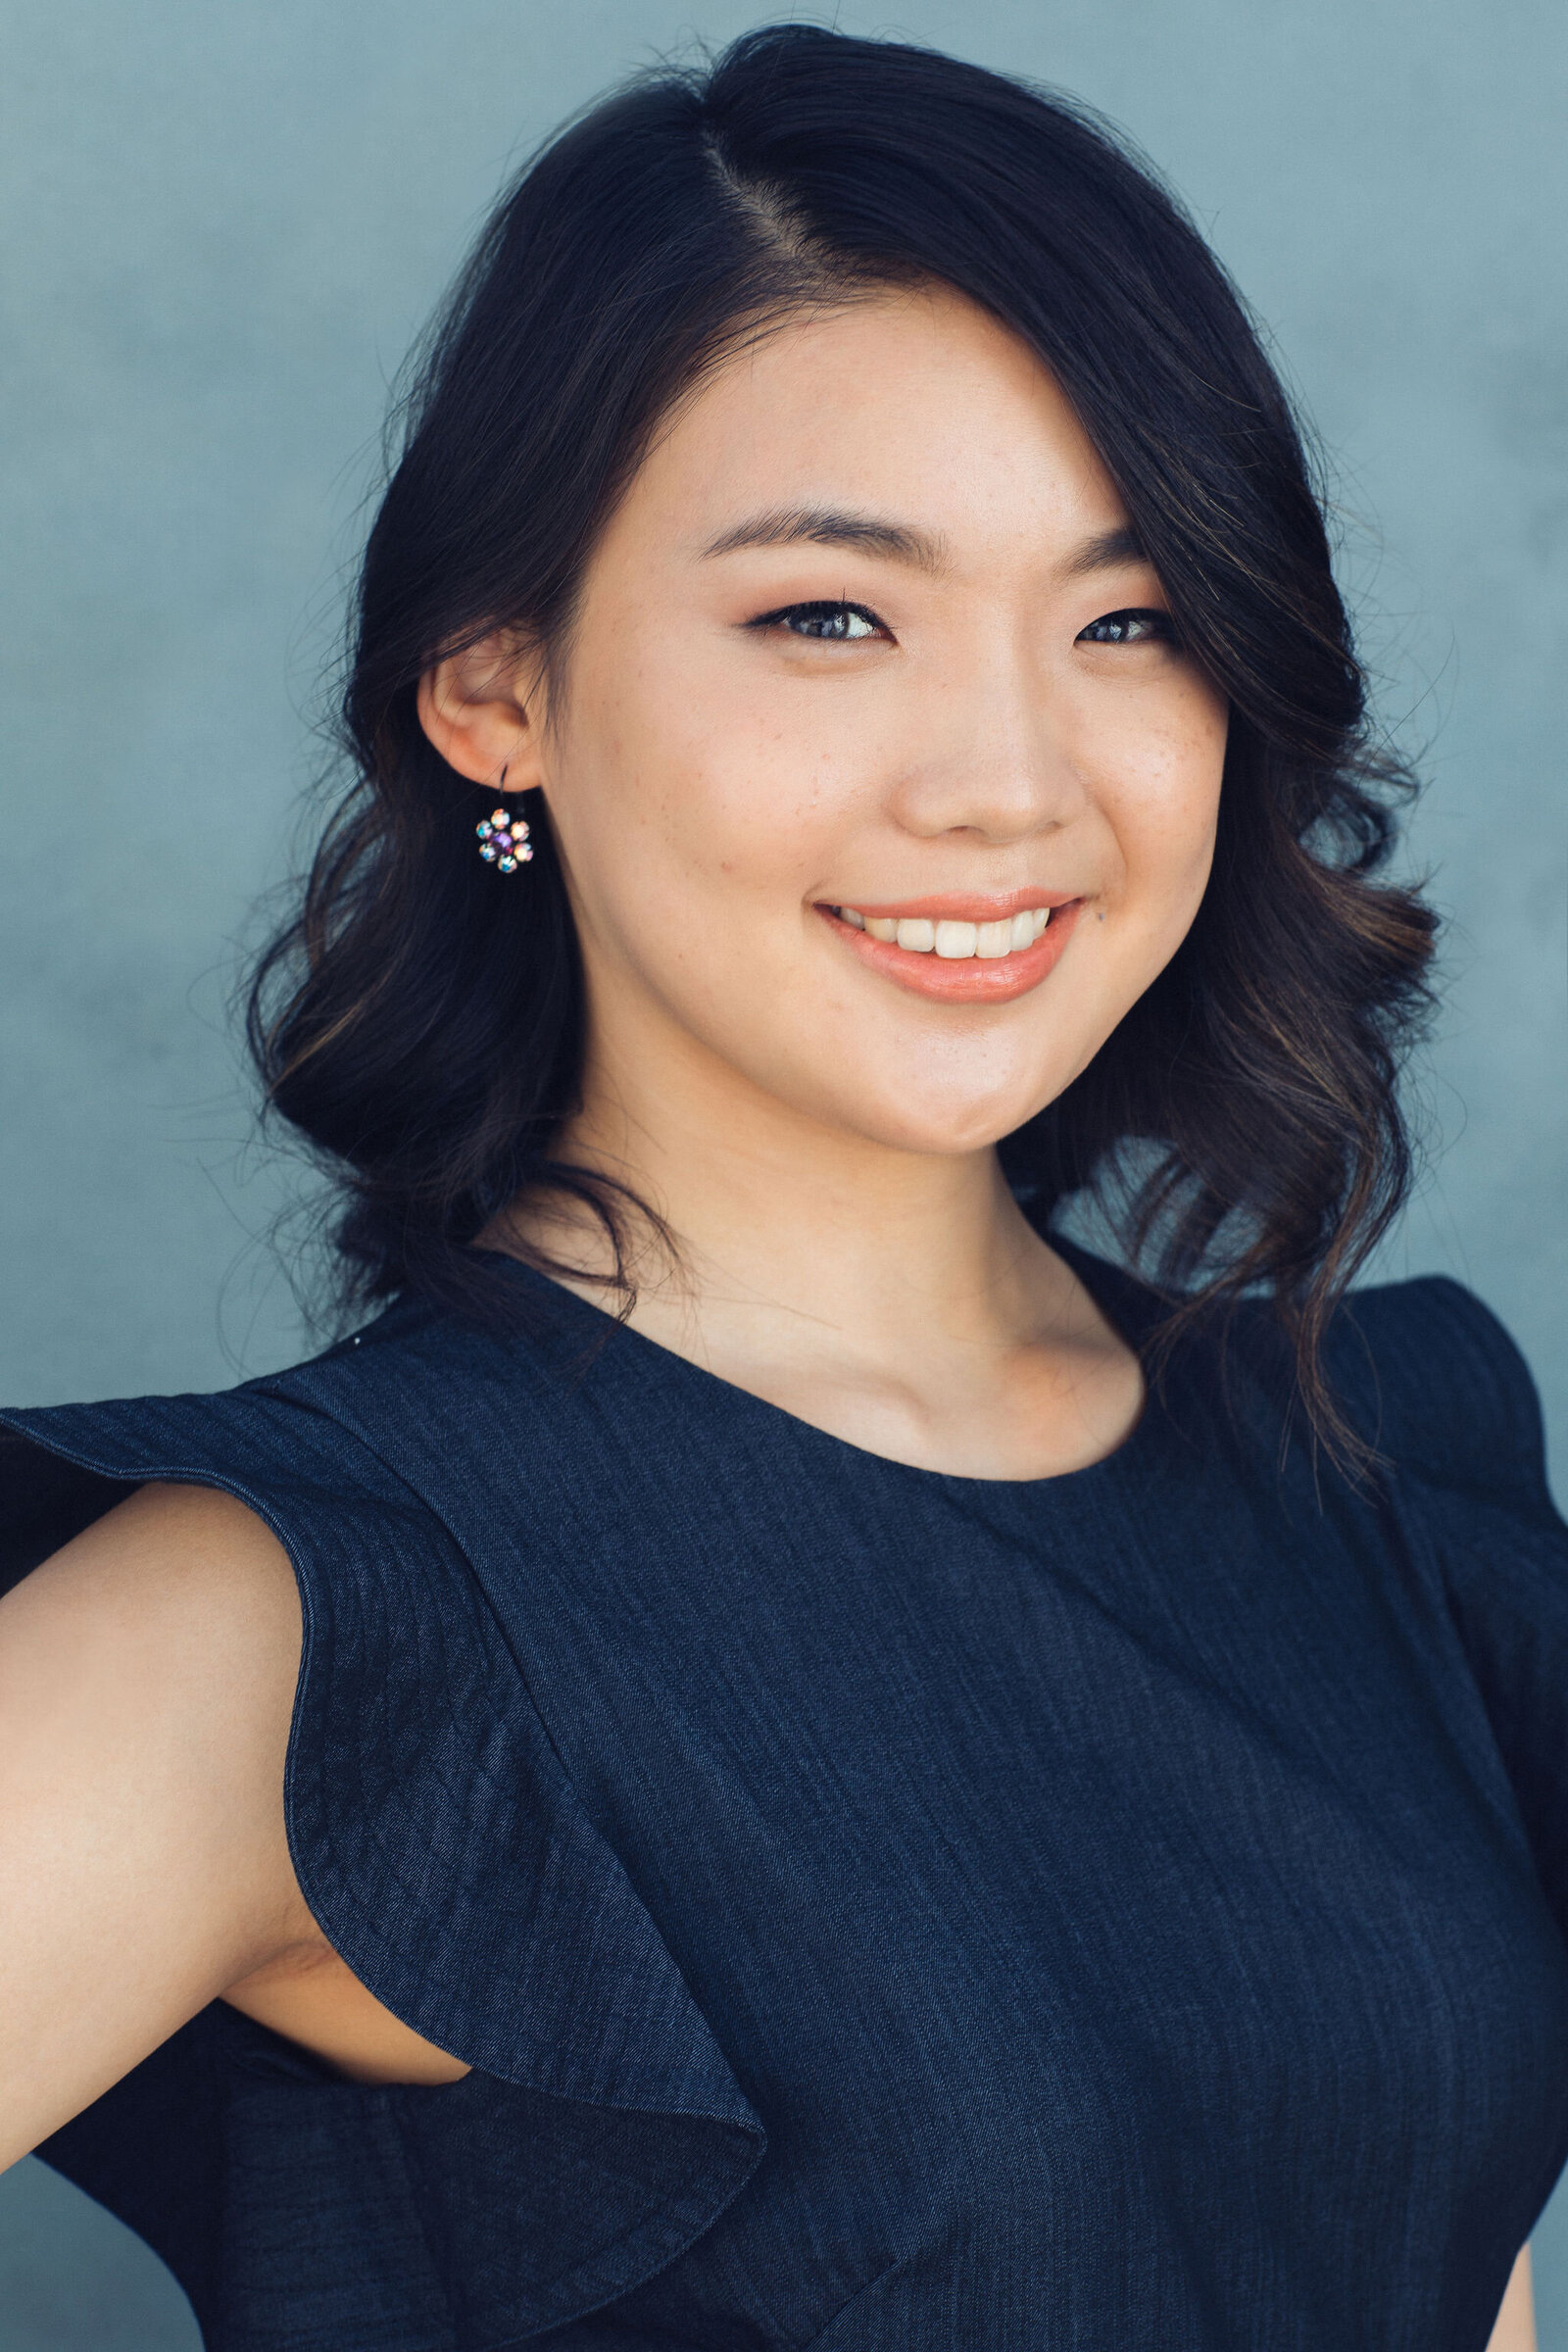 Headshot Photograph Of Young Woman In Navy Blue Sleeveless Los Angeles